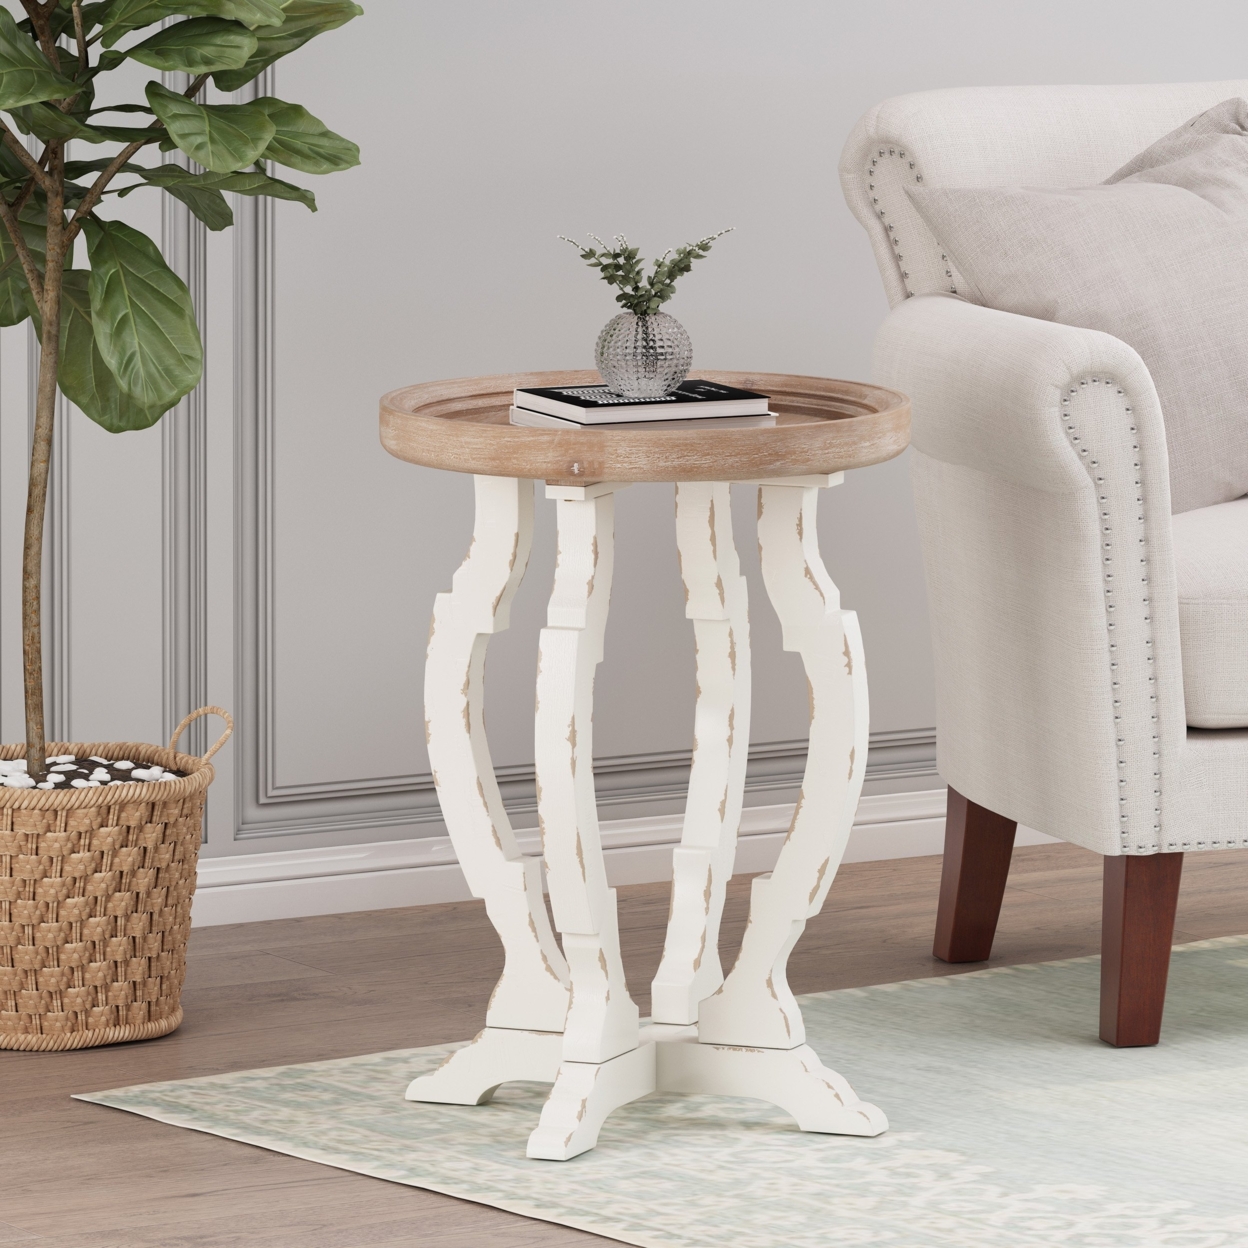 Emilya French Country Accent Table With Round Top - Distressed White/natural